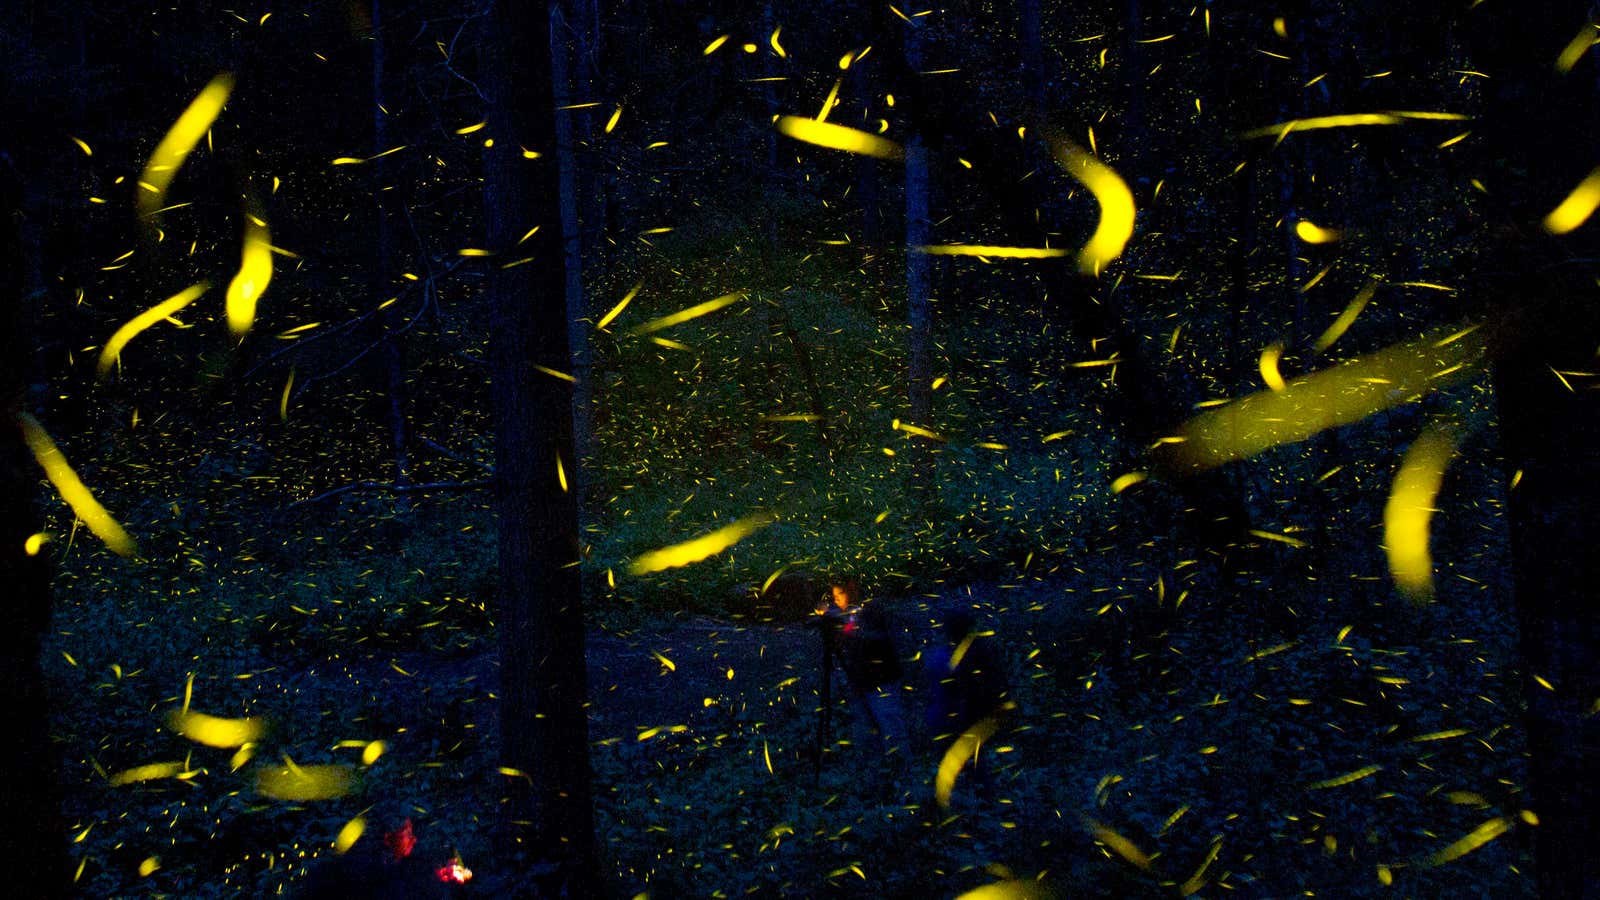 FILE – In this July 21, 2016 file photo, fireflies seeking mates light up in synchronized bursts as photographers take long-exposure pictures, inside Piedra Canteada, a tourist camp cooperatively owned by 42 local families, inside an old-growth forest near the town of Nanacamilpa, Tlaxcala state, Mexico. The families purchased the 1560-acre (630-hectare) tract of land from a private owner in 1990 and began offering camping and forest visits, while continuing to exploit the logging quota authorized by the government. Only in 2011, did they realize the potential draw of the local firefly population, and begin advertising nighttime viewing tours. (AP Photo/Rebecca Blackwell, File)